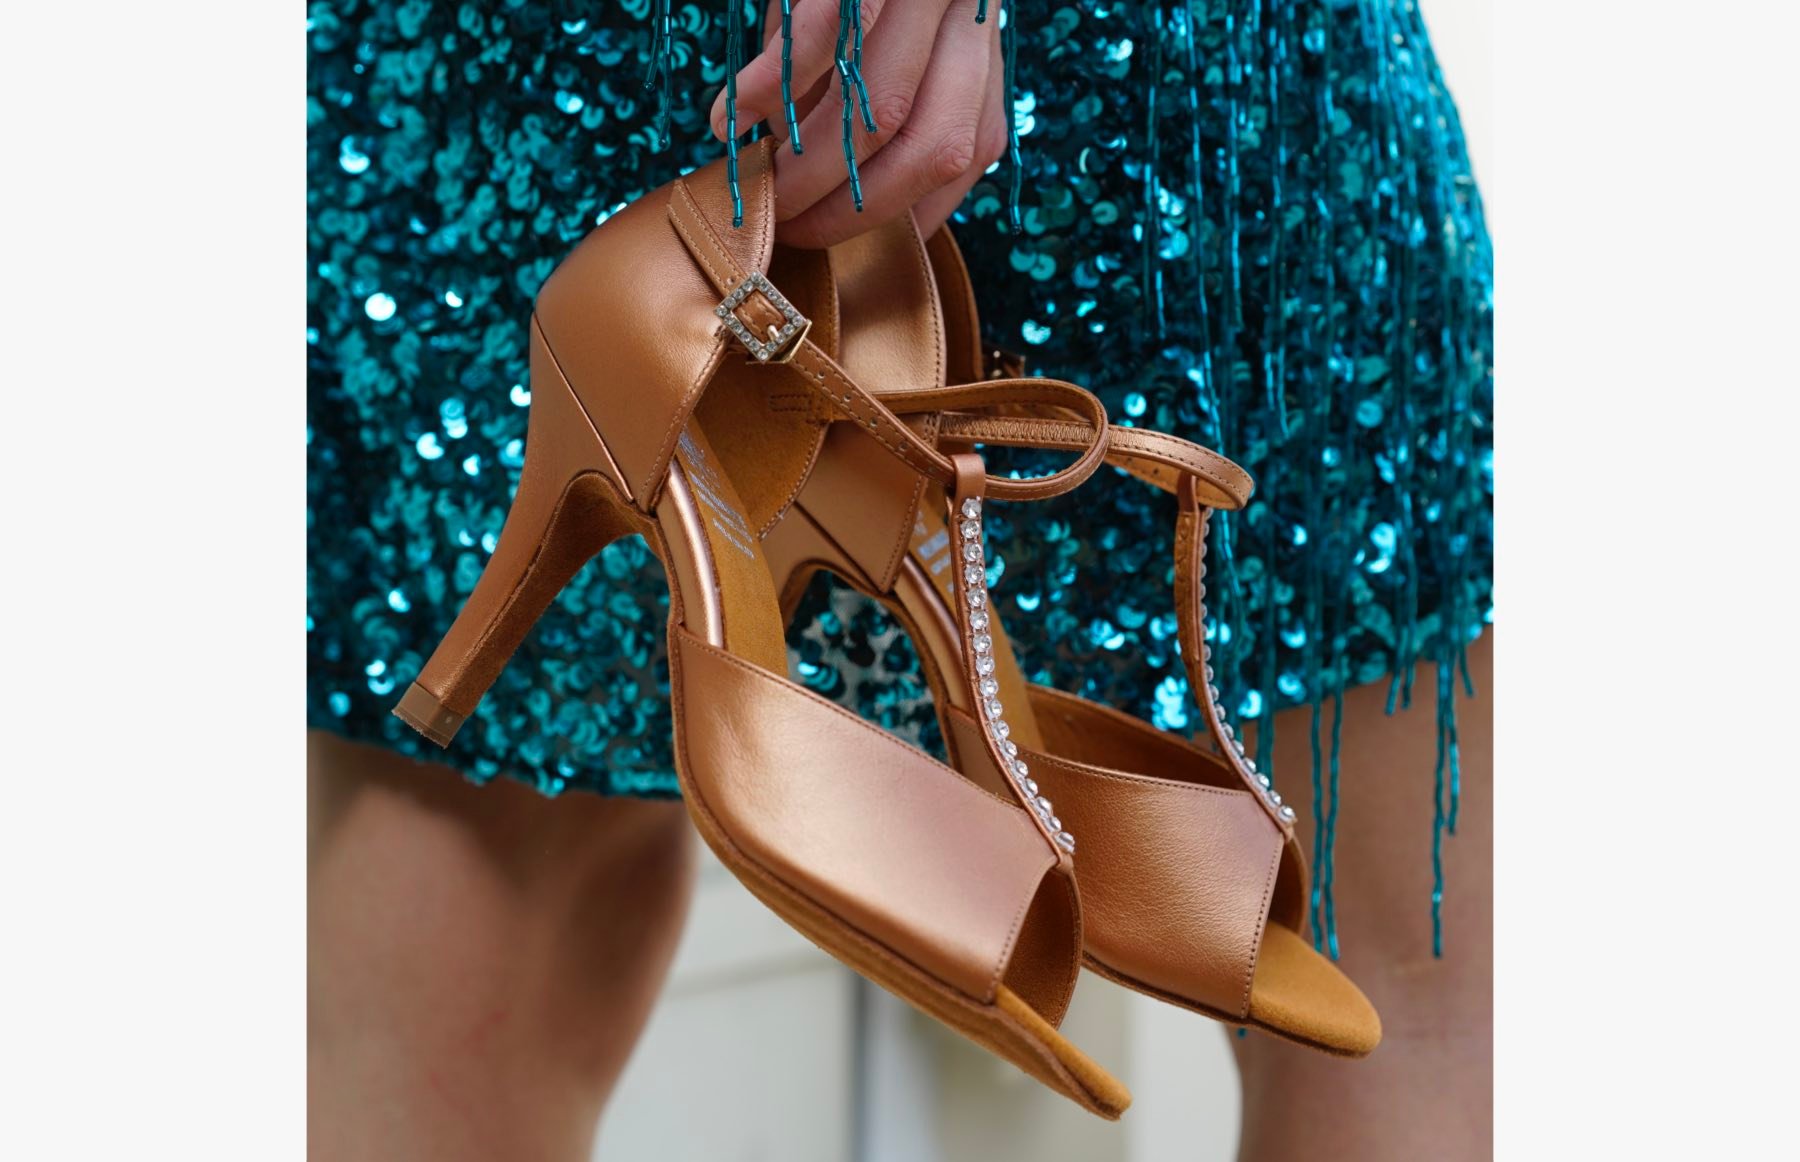 How to Care For Your Latin Dancing Shoes - Supadance